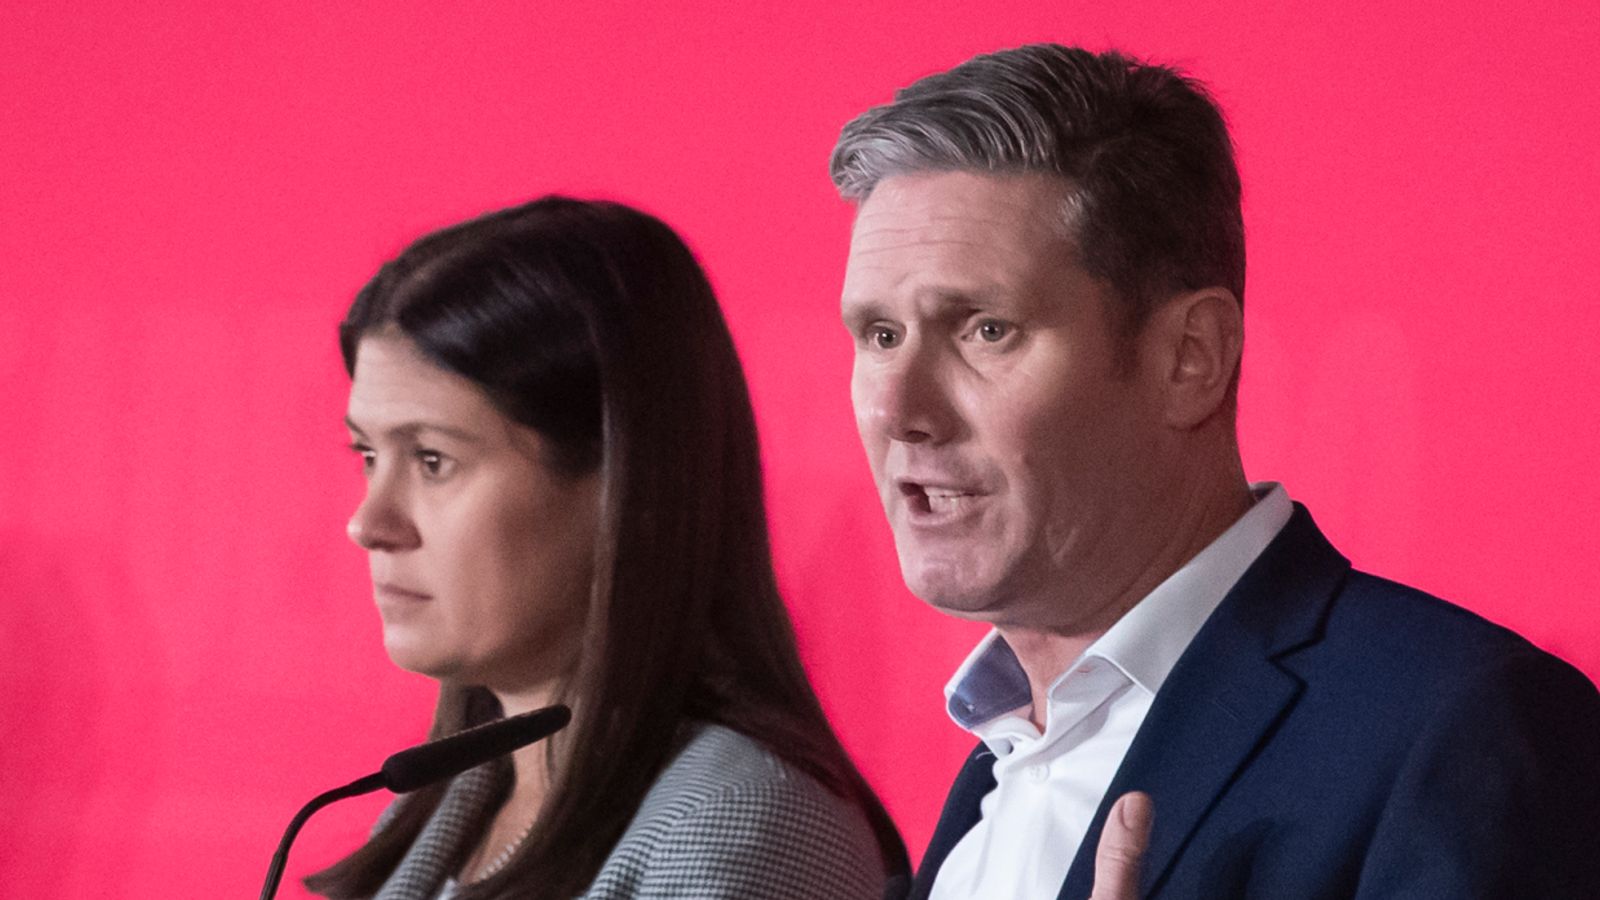 A ruthless Labour reshuffle - with tricky conversations as Sir Keir Starmer makes demotions